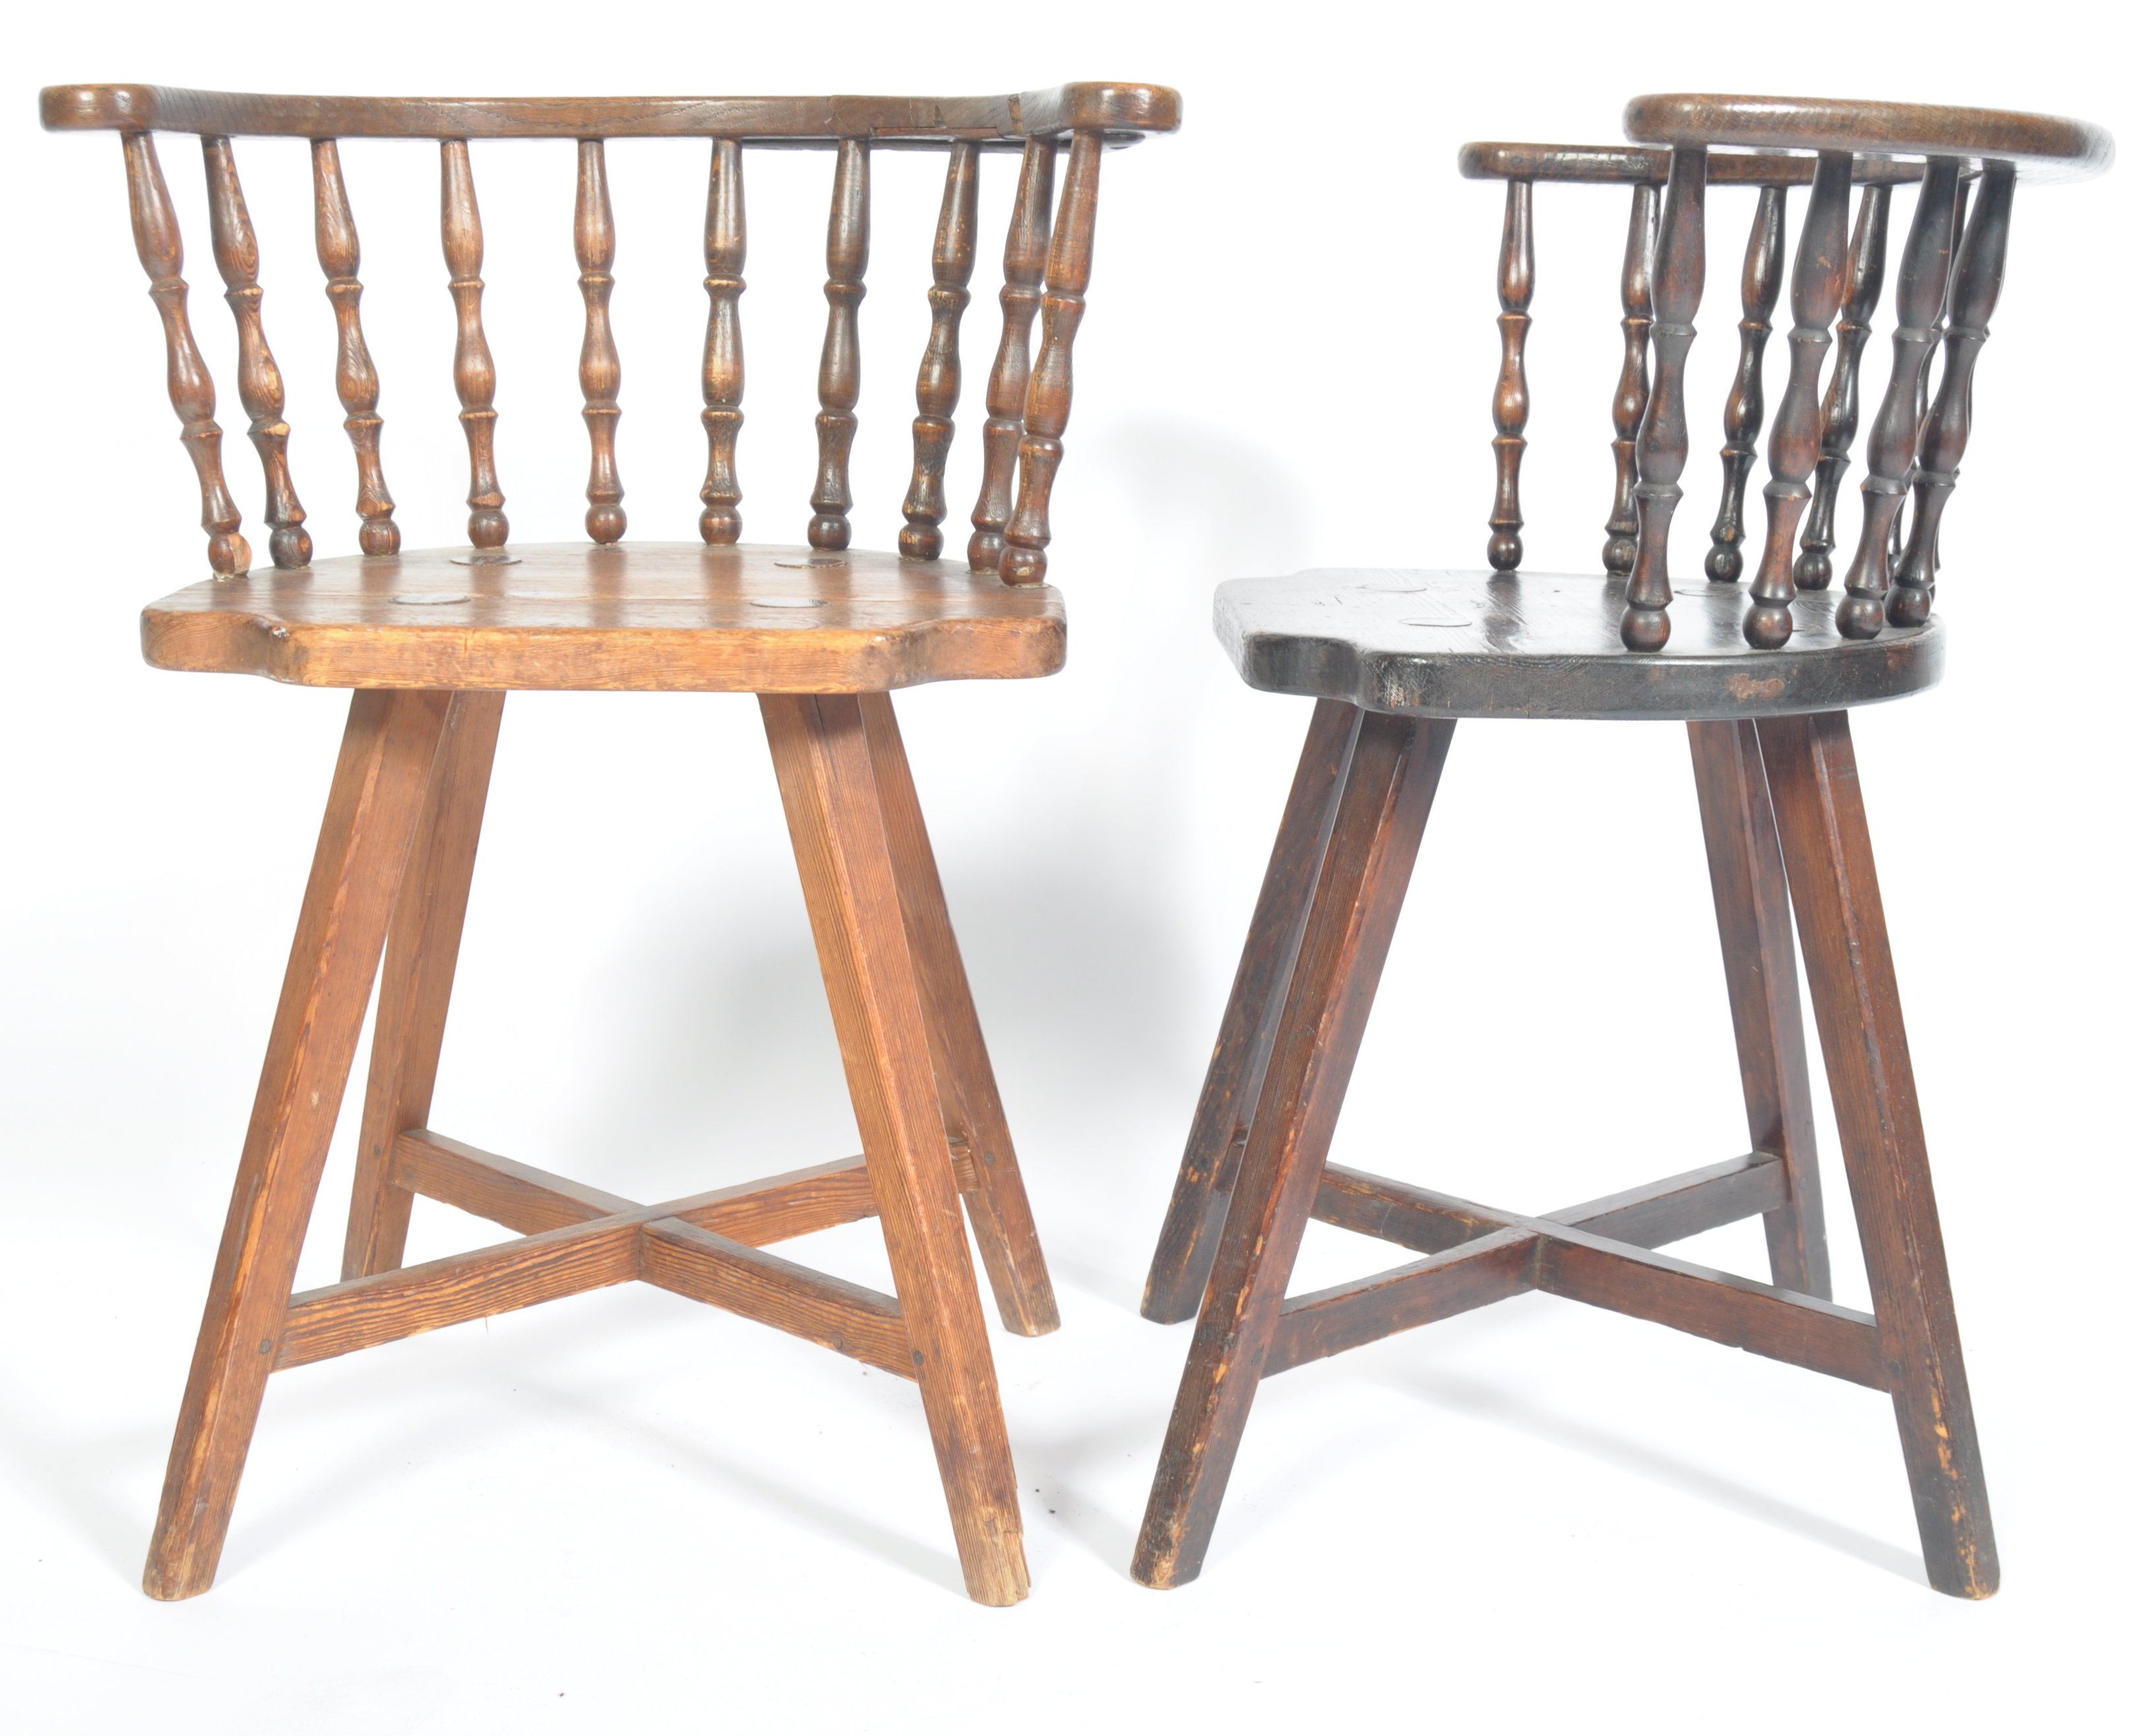 PAIR OF 19TH CENTURY PINE COUNTRY TAVERN PUB CHAIRS - Image 3 of 5